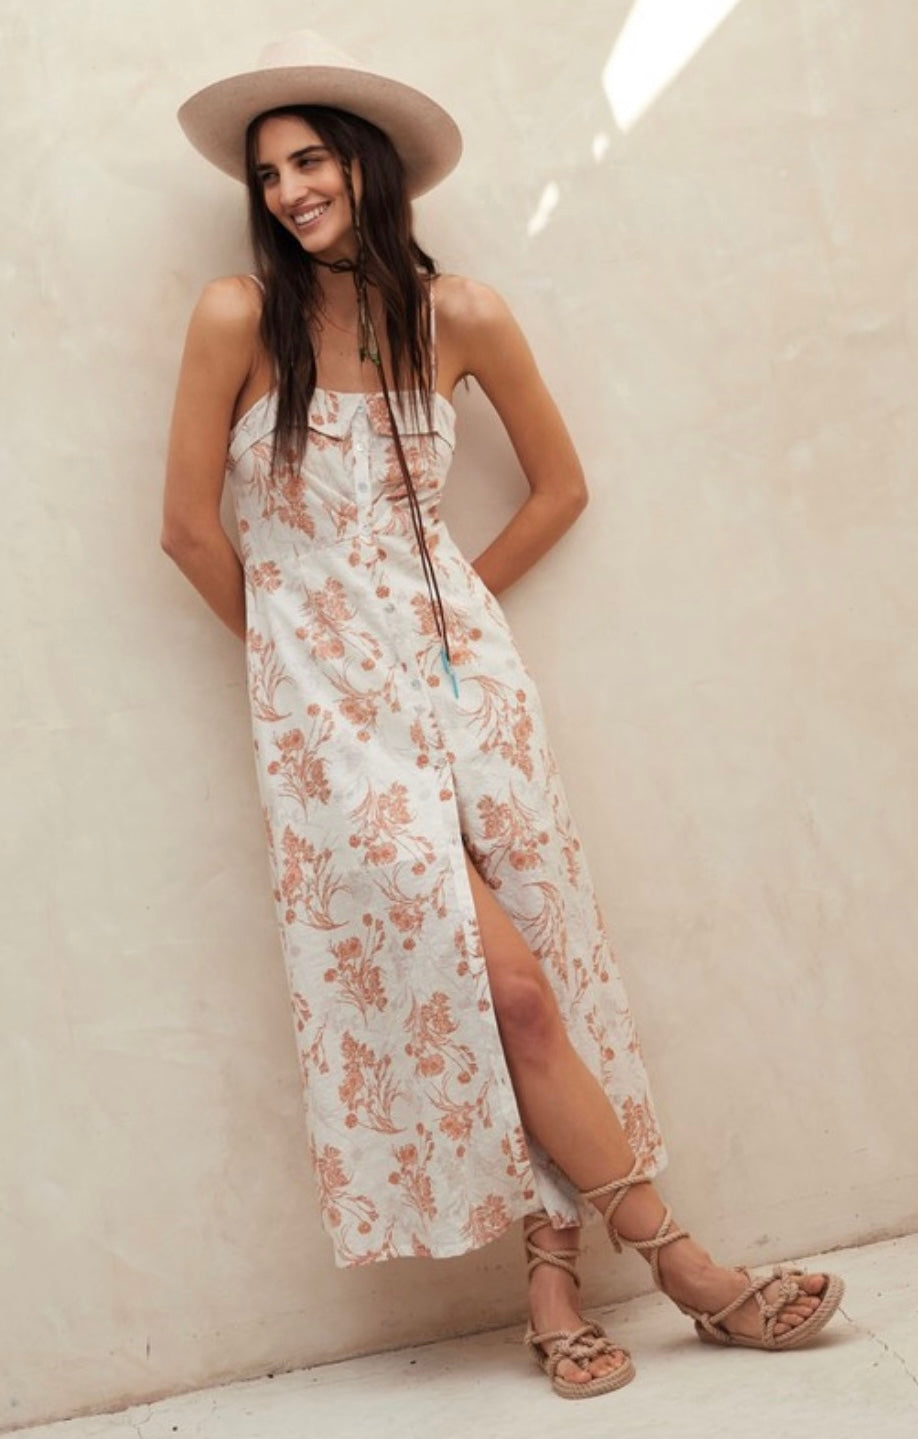 Floral Sweetheart Neck Button Front Midi Dress